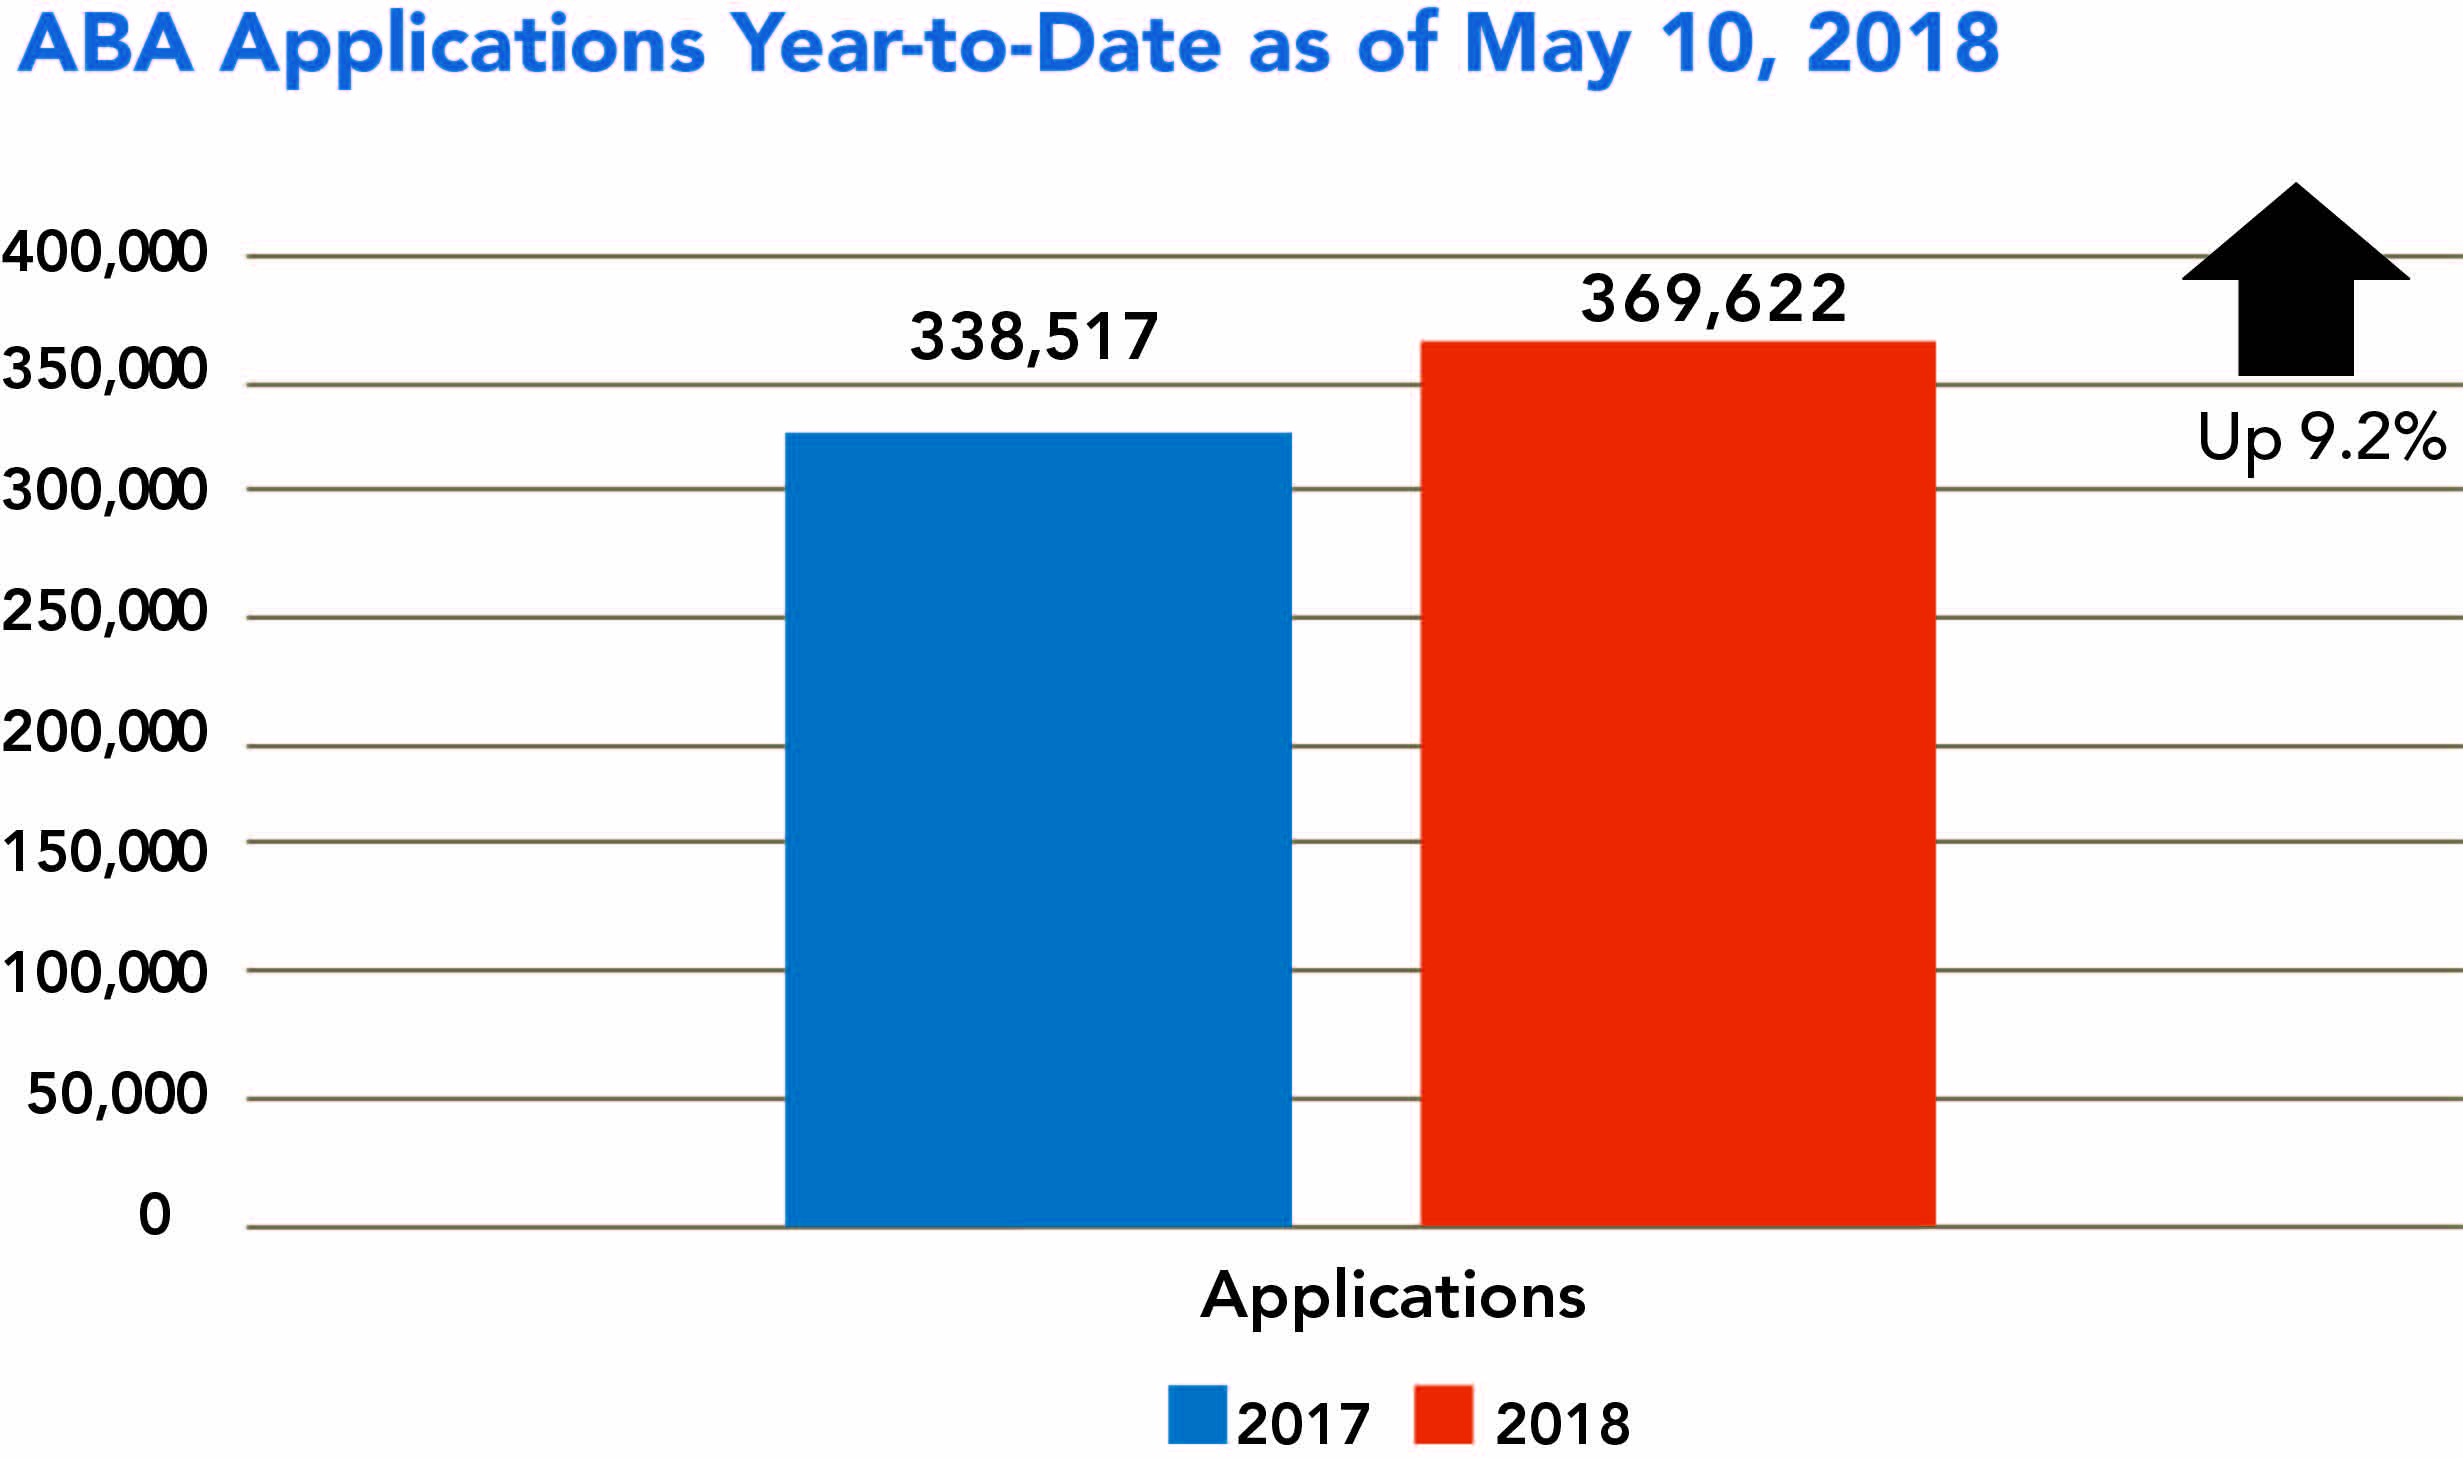 As of 5/10/18, there are 369,622 applications submitted by 56,111 applicants for the 2018–2019 academic year. Applicants are up 8.8% and applications are up 9.2% from 2017–2018.